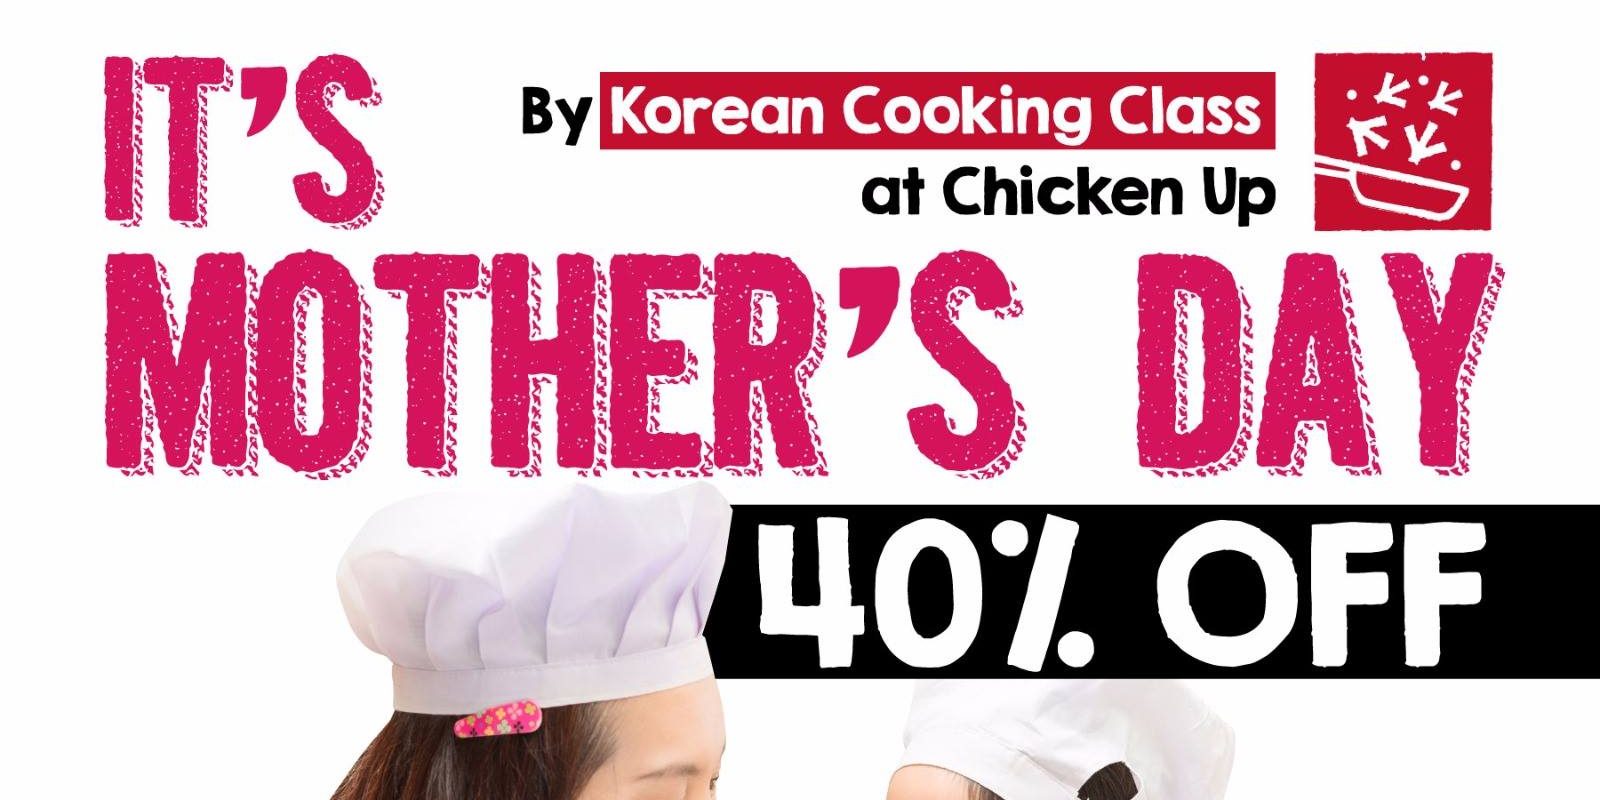 Chicken Up Singapore Korean Cooking Class Mothers’ Day 40% Off Promotion ends 14 May 2017